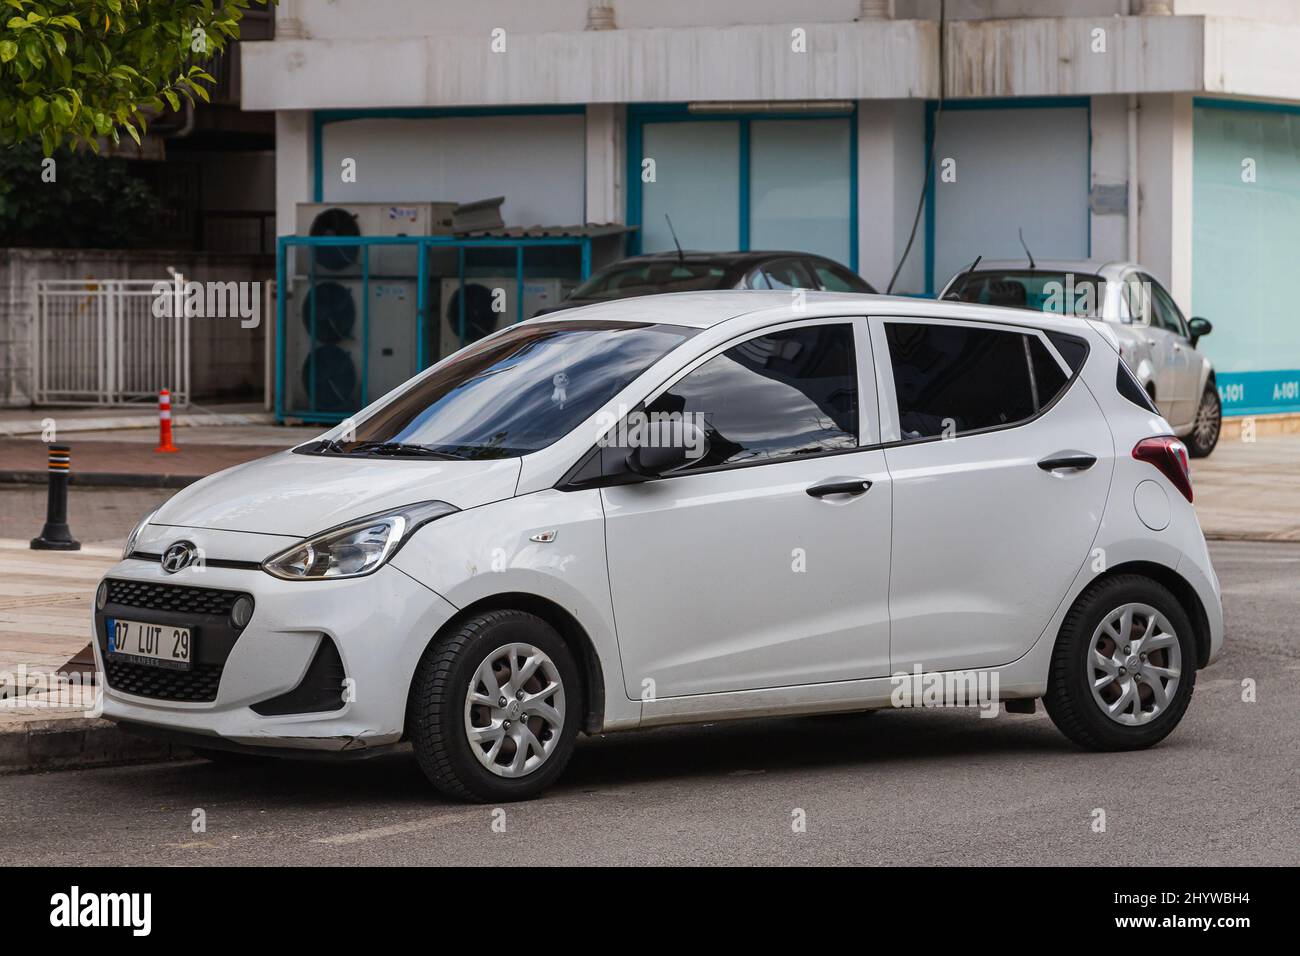 https://c8.alamy.com/comp/2HYWBH4/side-turkey-february-20-2022-white-hyundai-i10-is-parking-on-the-street-on-a-summer-day-against-the-backdrop-of-a-shop-2HYWBH4.jpg